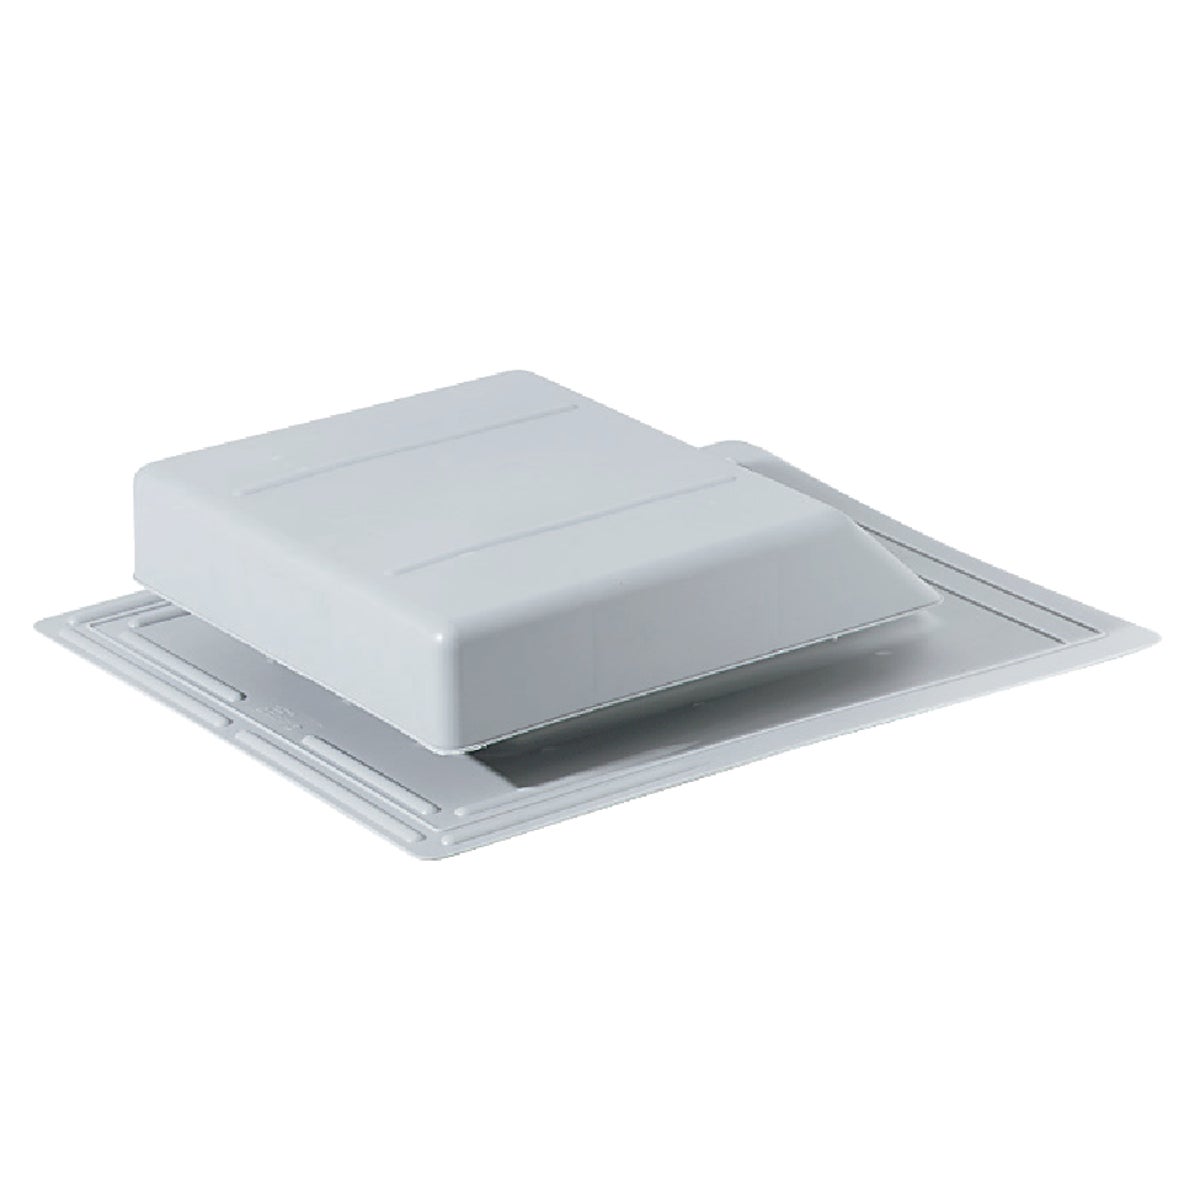 Airhawk 61 In. Gray Plastic Slant Back Roof Vent